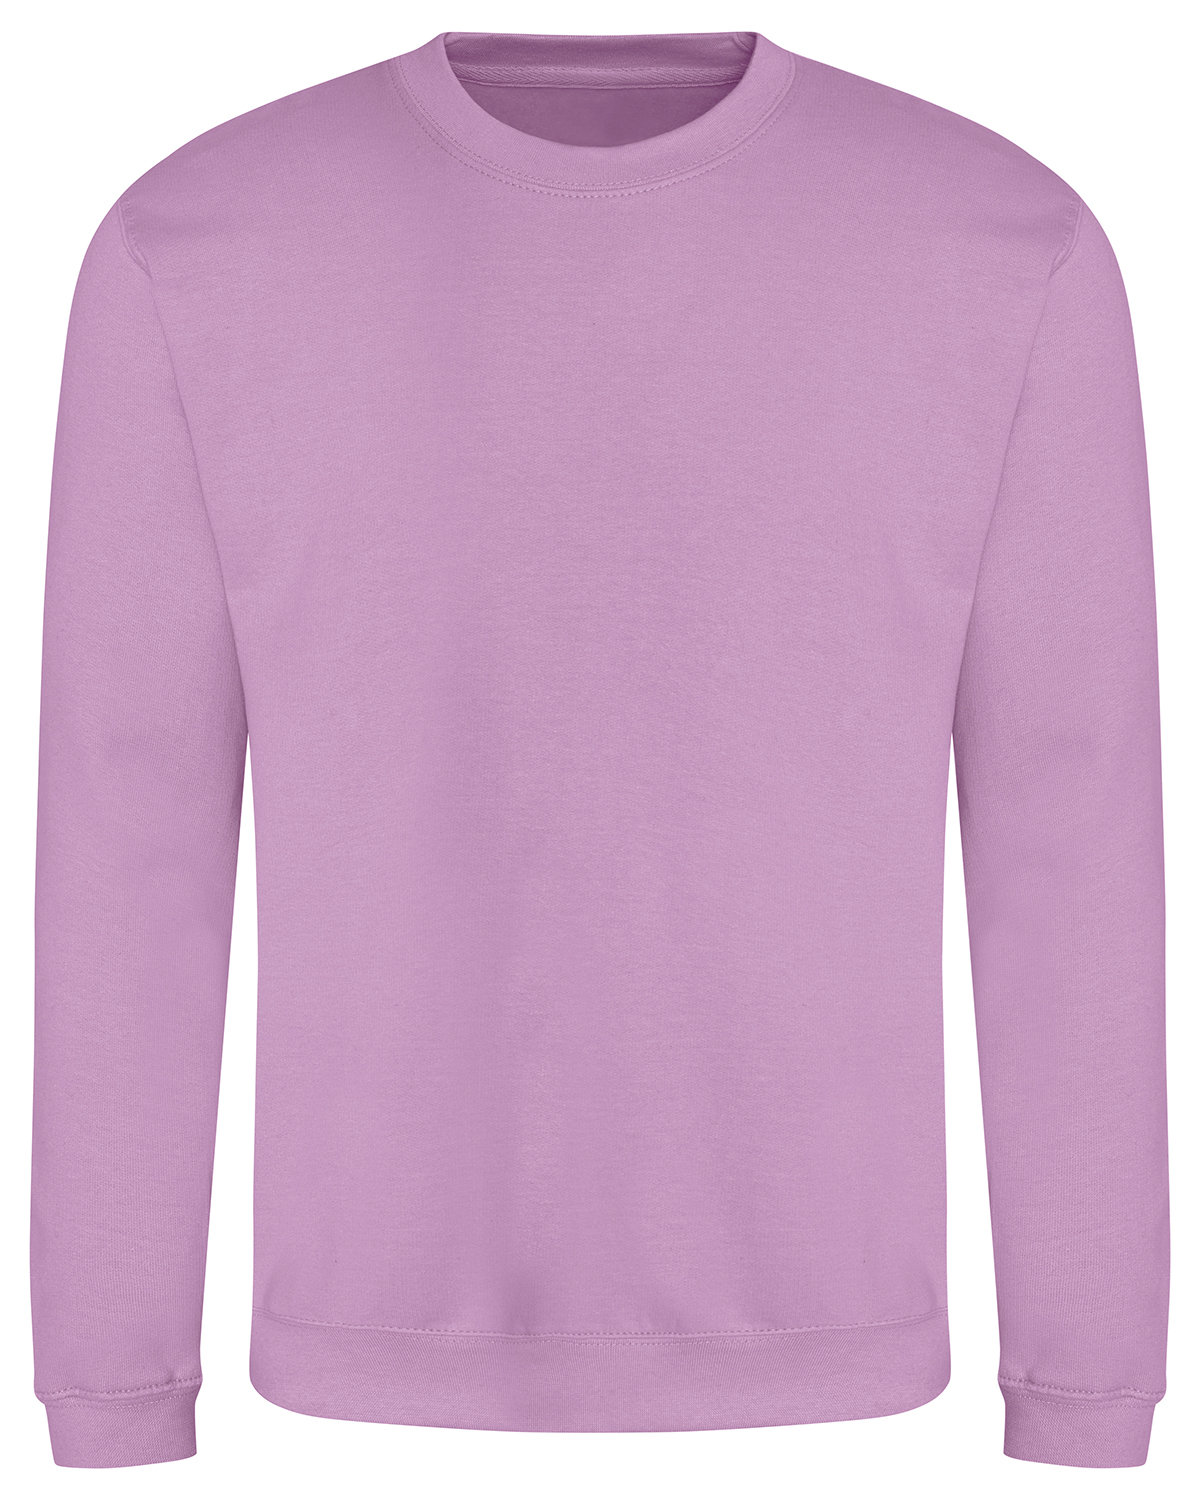 Just Hoods By AWDis Adult 80/20 Midweight College Crewneck Sweatshirt lavender 